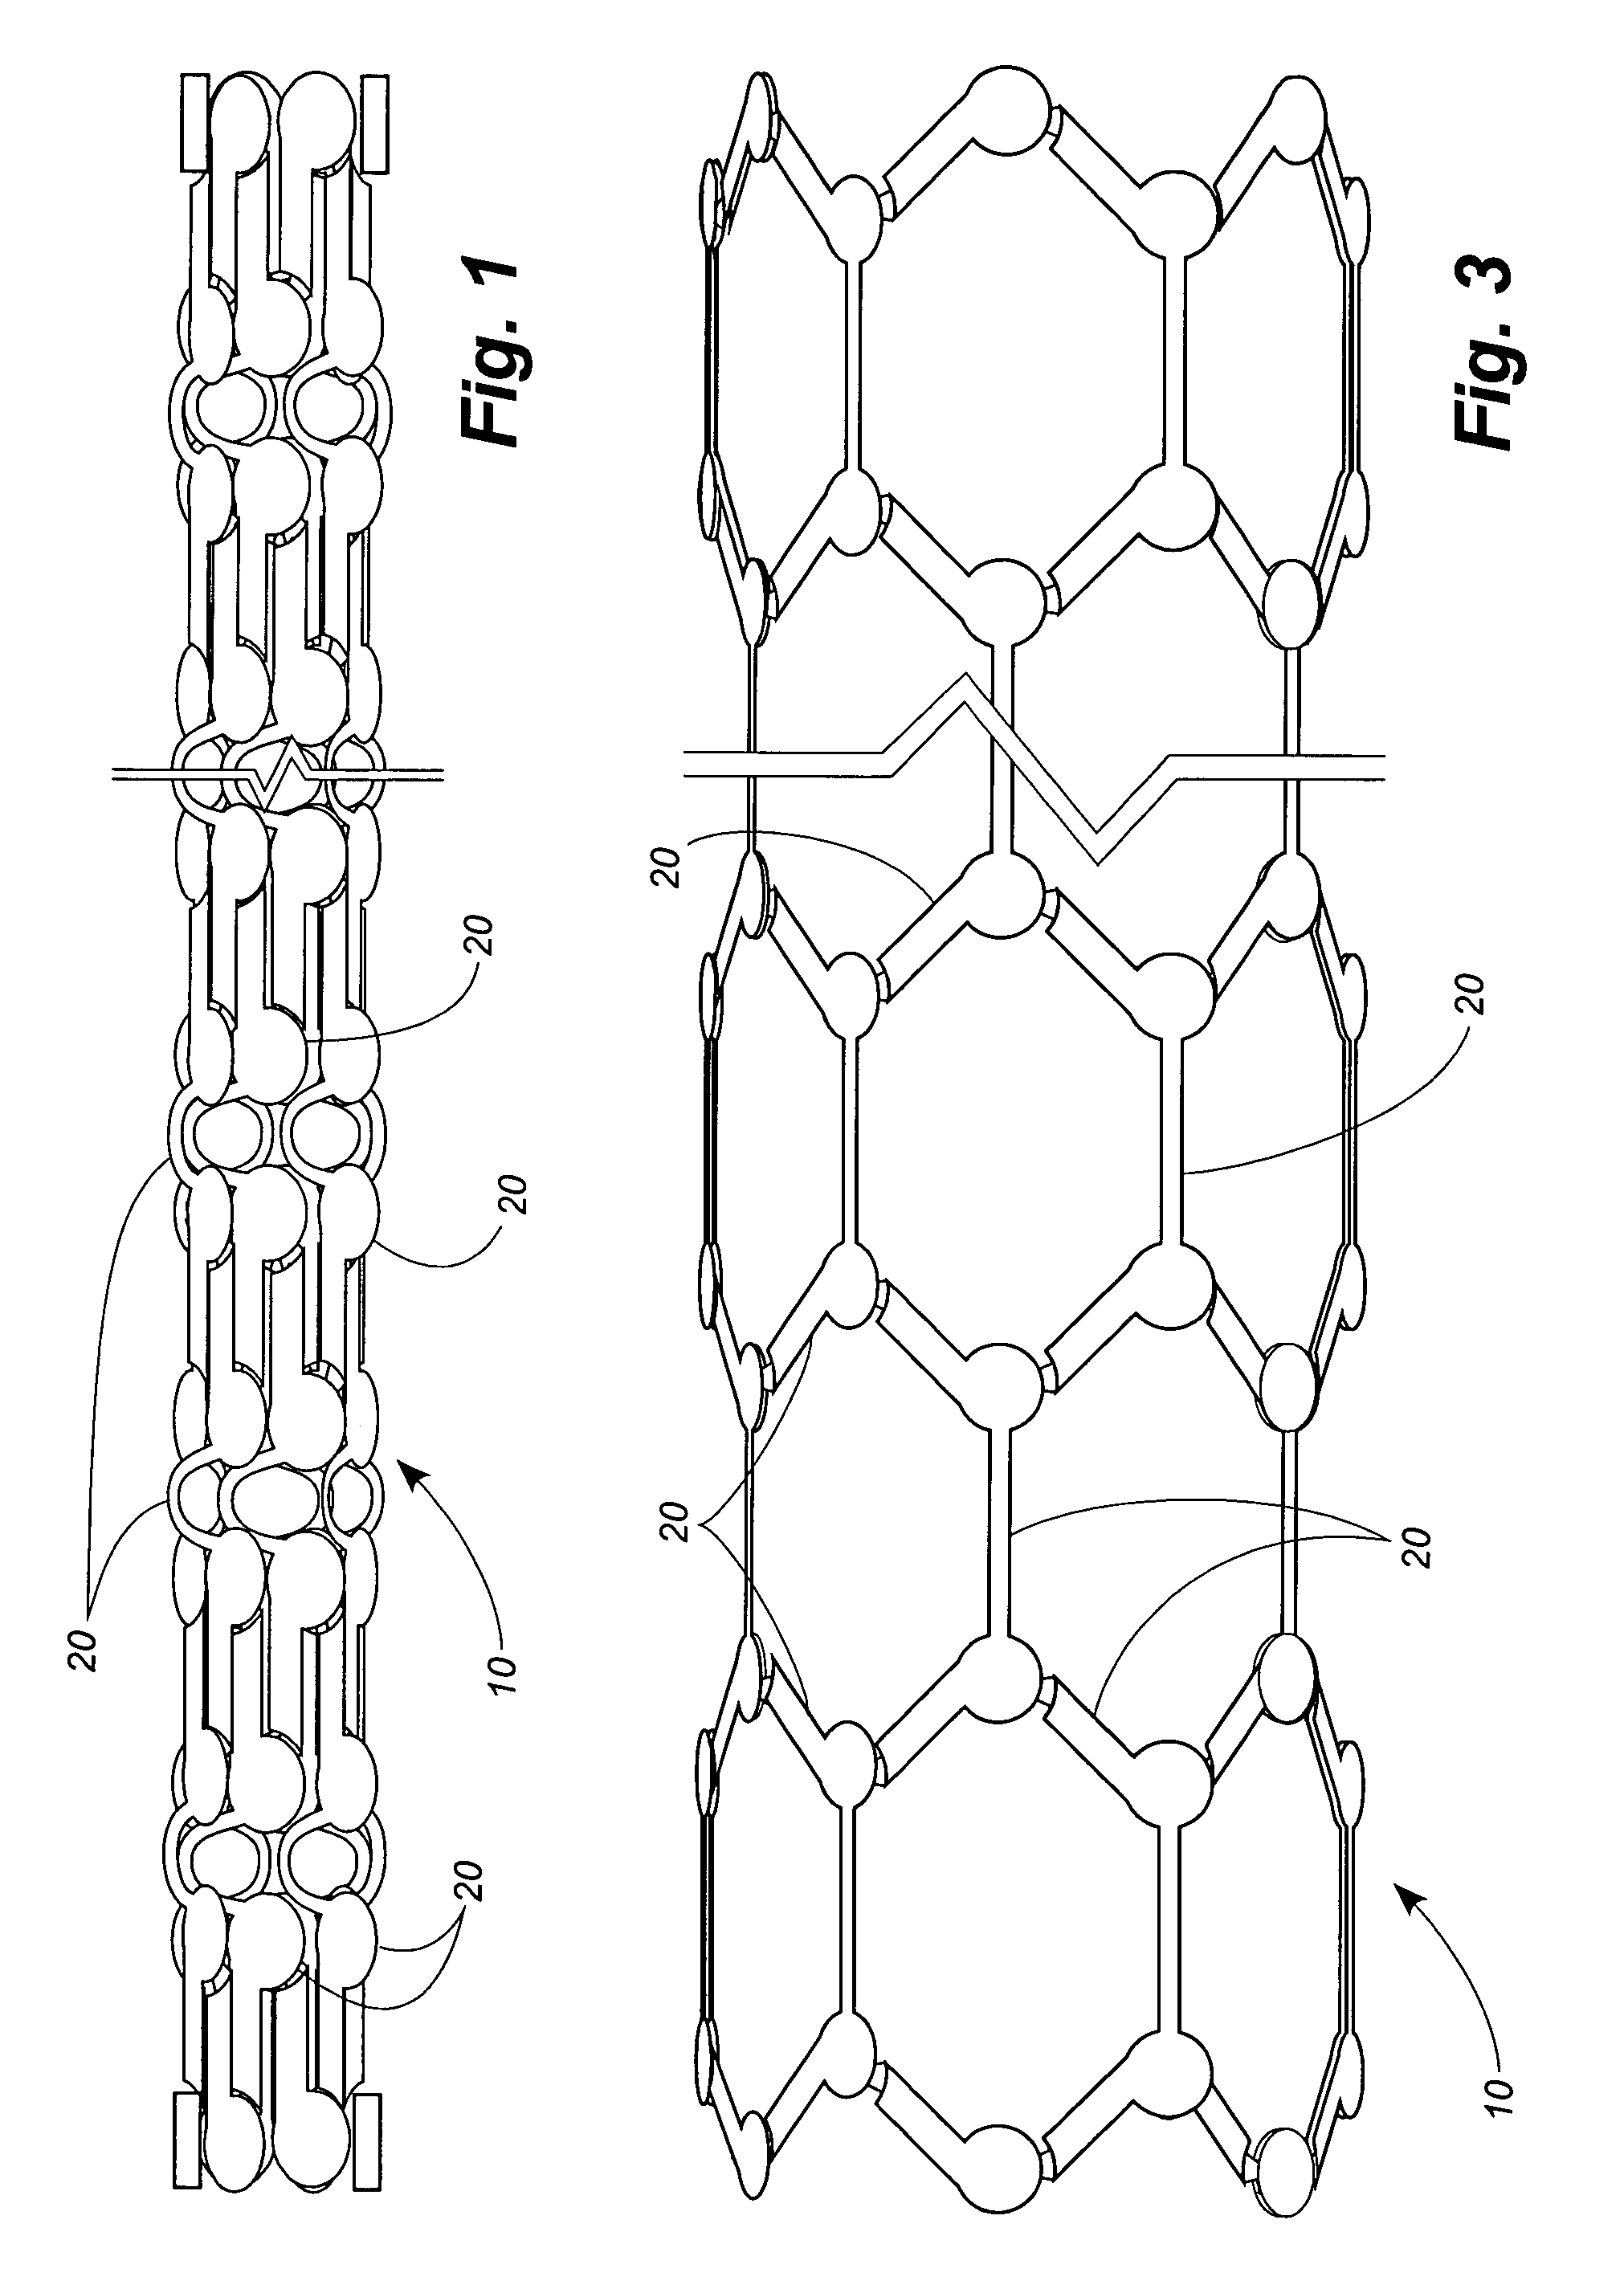 Stent with micro-latching hinge joints